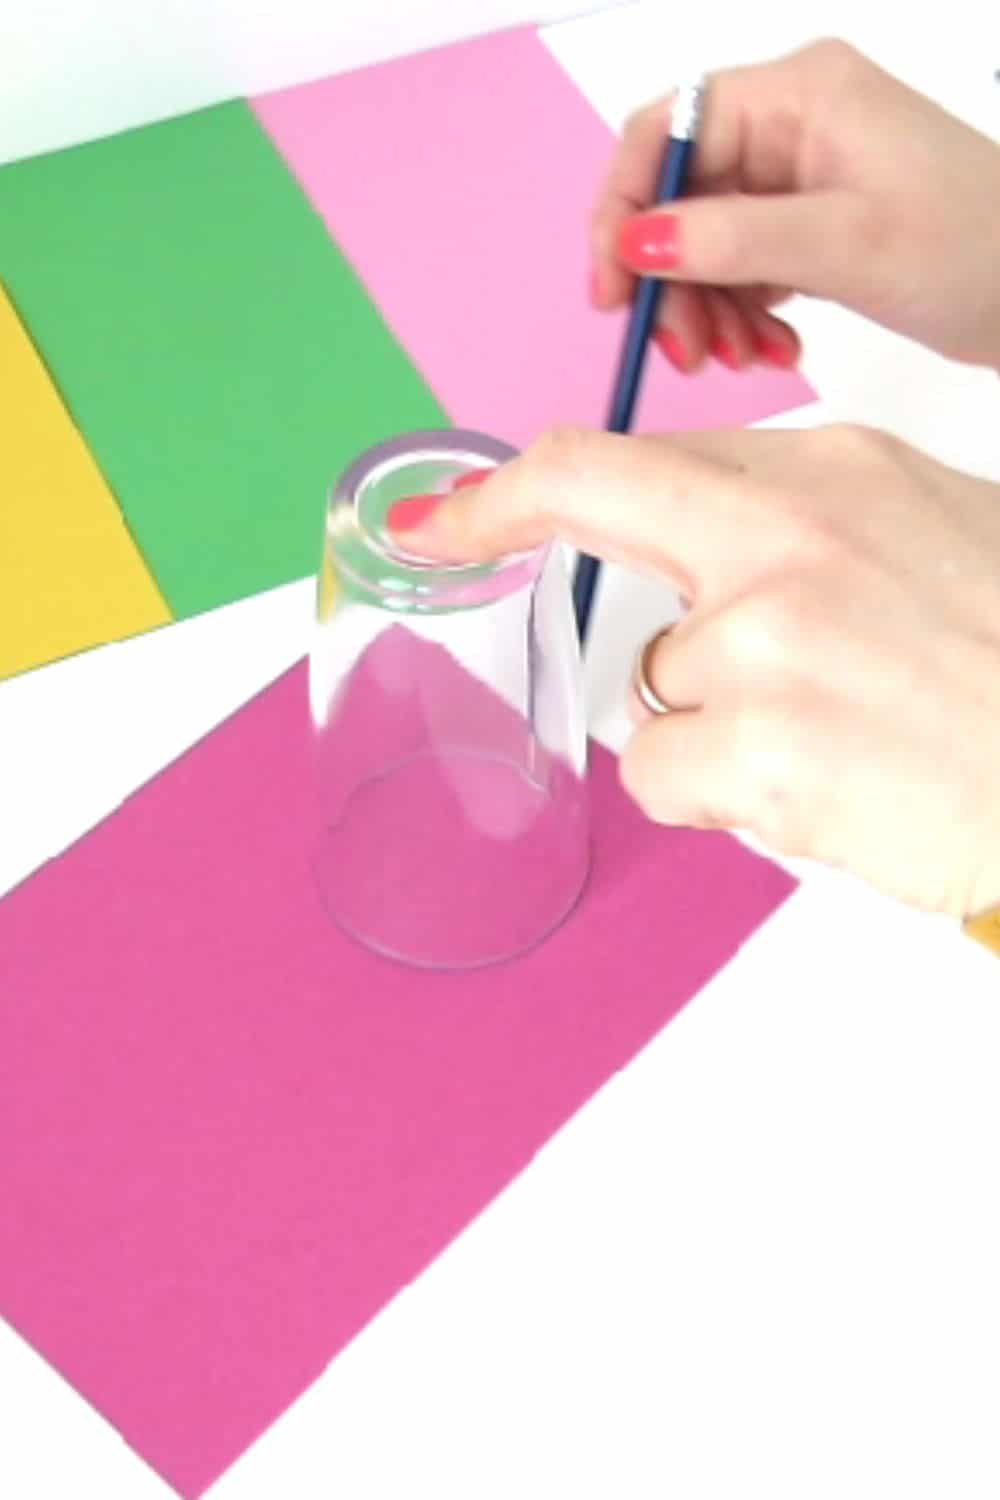 draw a circle on paper